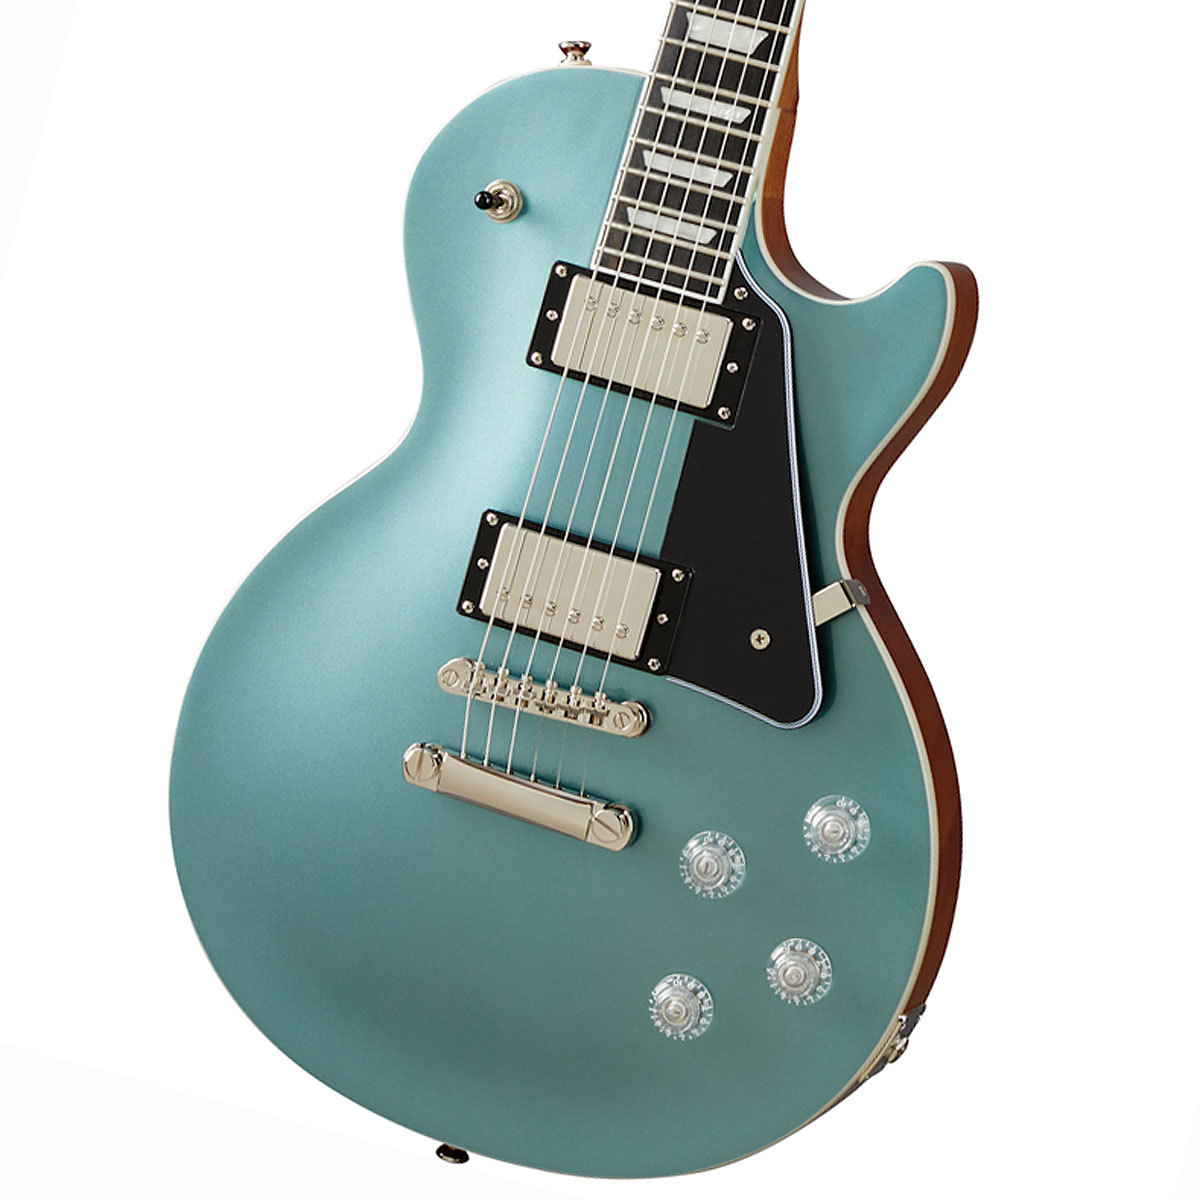 Epiphone / Inspired by Gibson Les Paul Modern Faded Pelham Blue